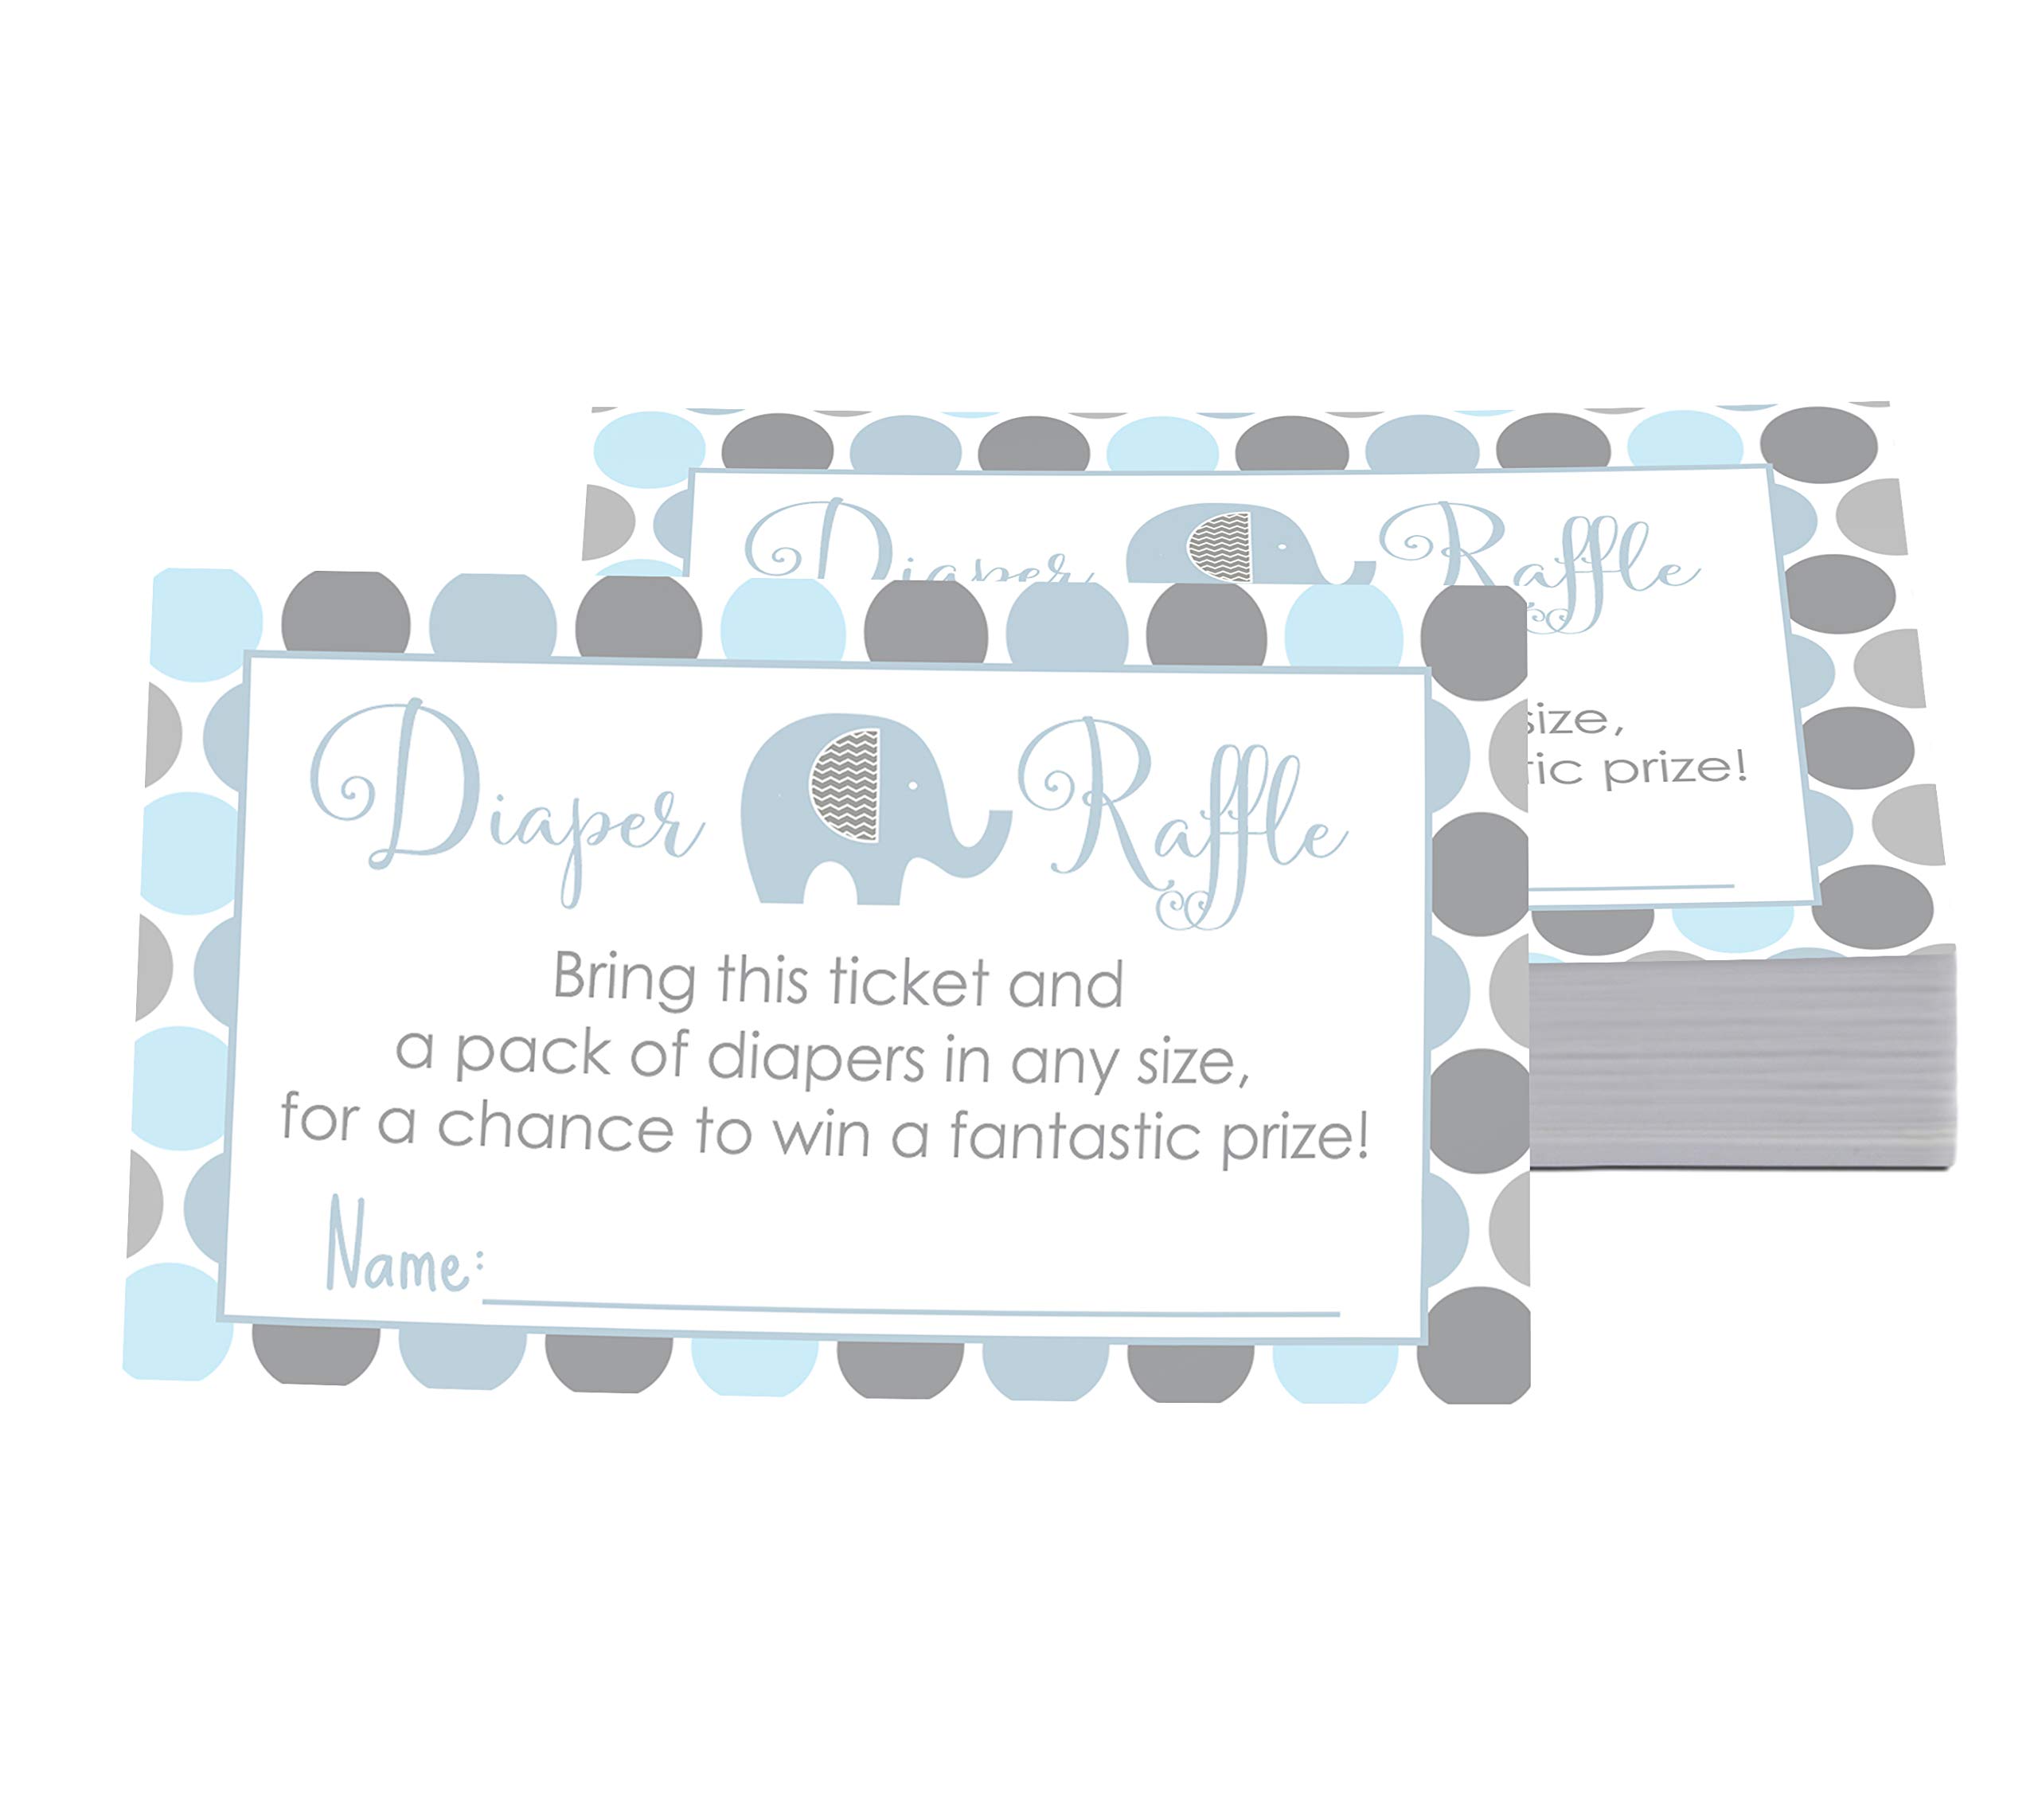 Paper Clever Party Blue Elephant Baby Shower Diaper Raffle Tickets (25 Pack) Boys Baby Shower Prize Games for Drawings - Invitation Insert Cards – Royal Prince Theme Blue - 2x3.5 Printed Set